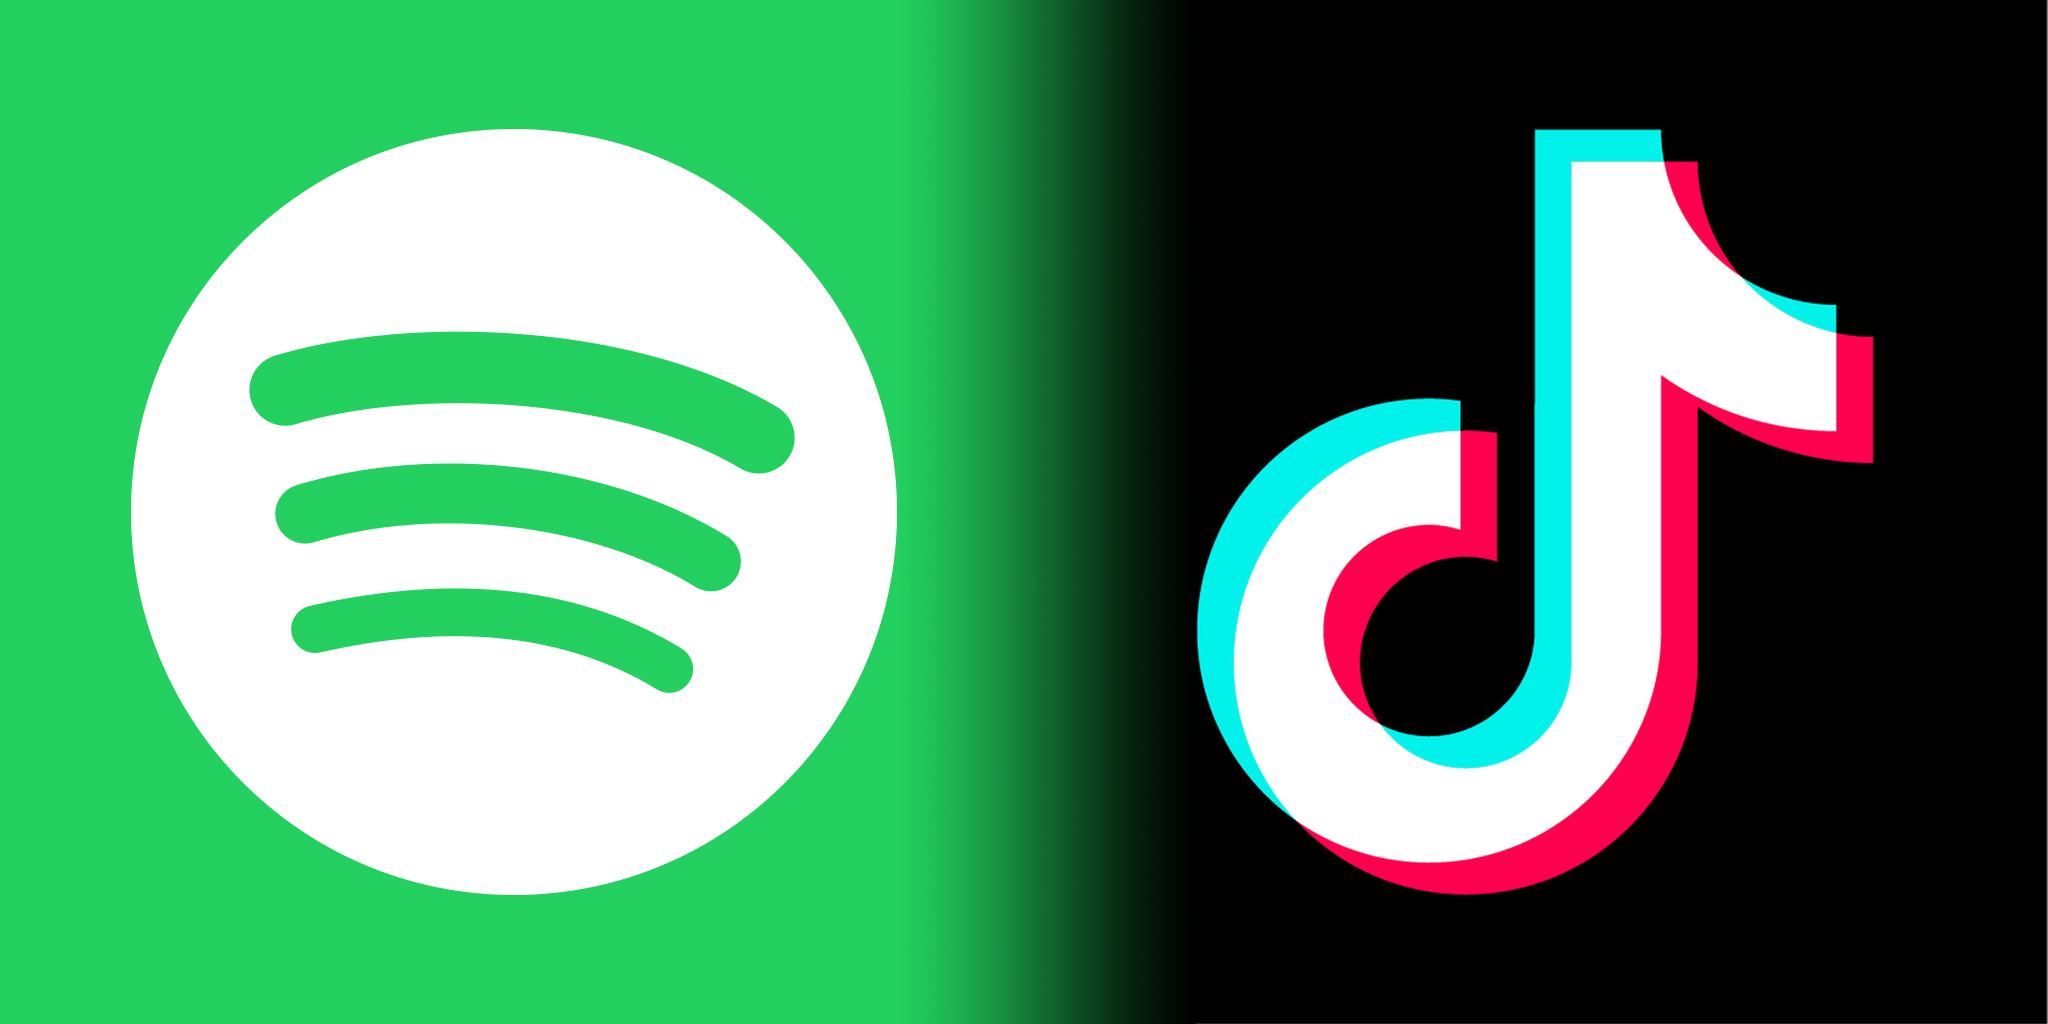 Spotify and TikTok team up to launch free Spotify Premium offer